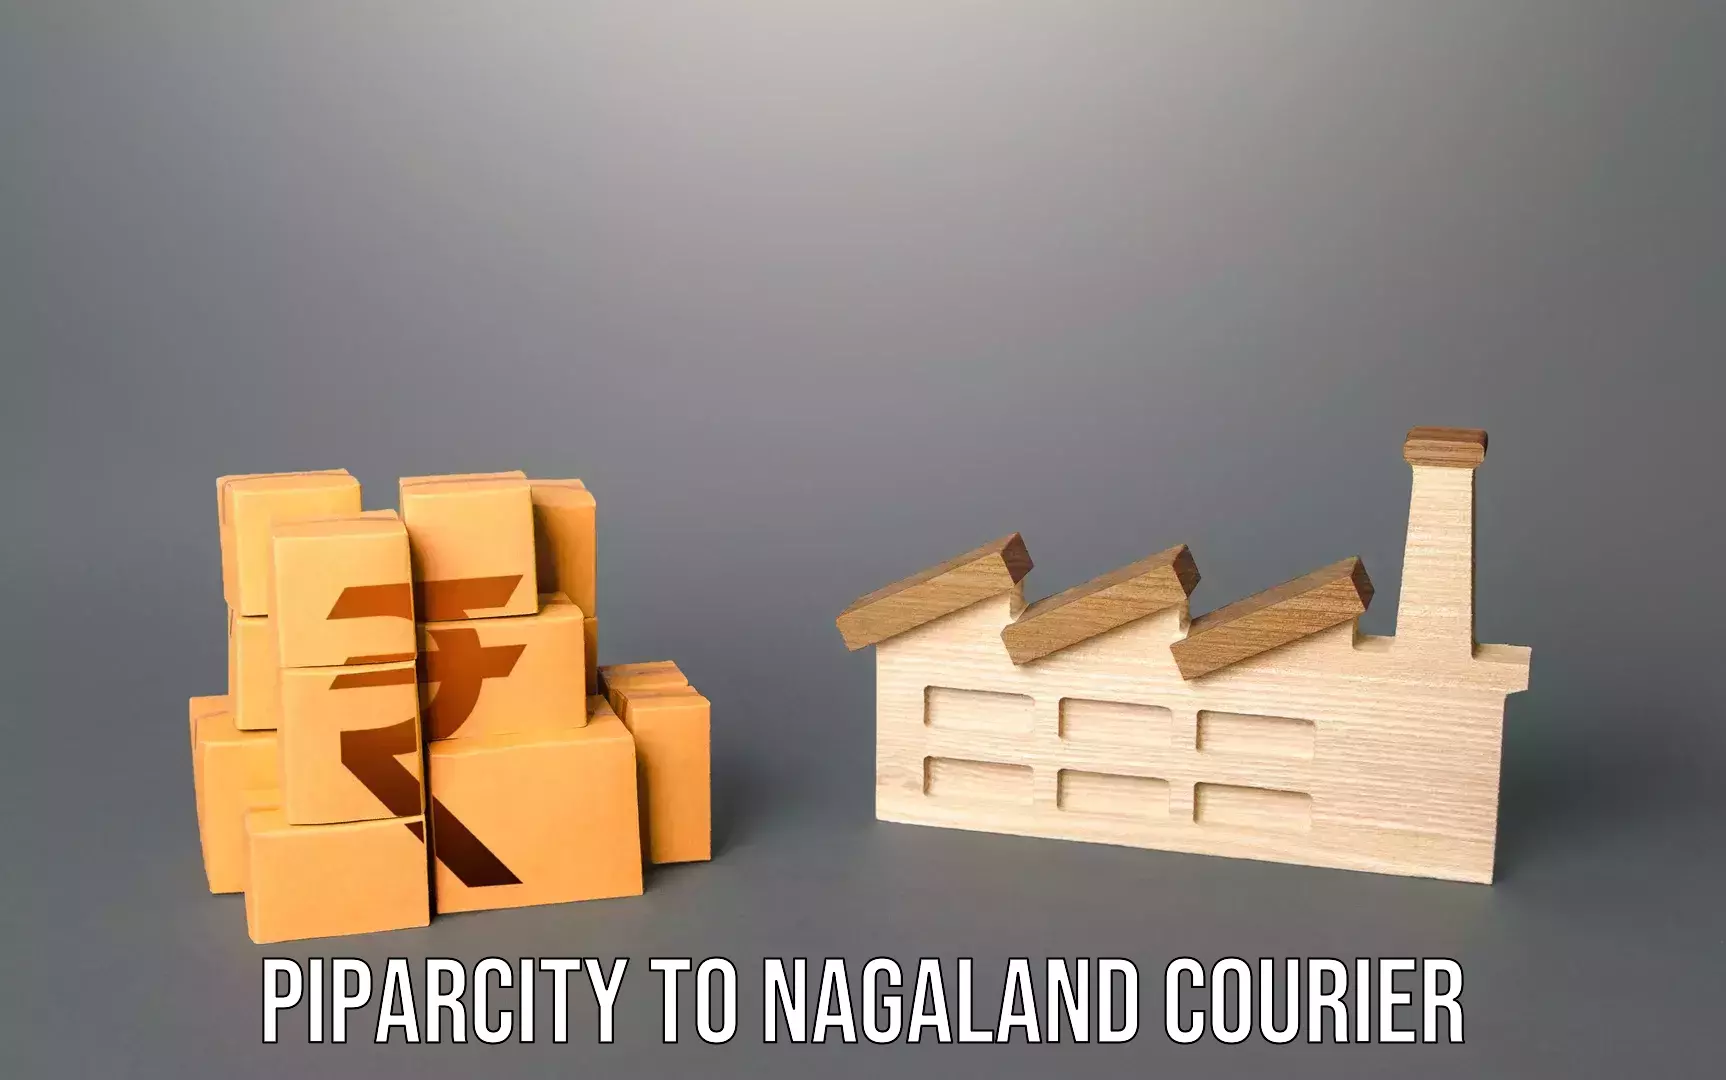 Same day luggage service Piparcity to Nagaland